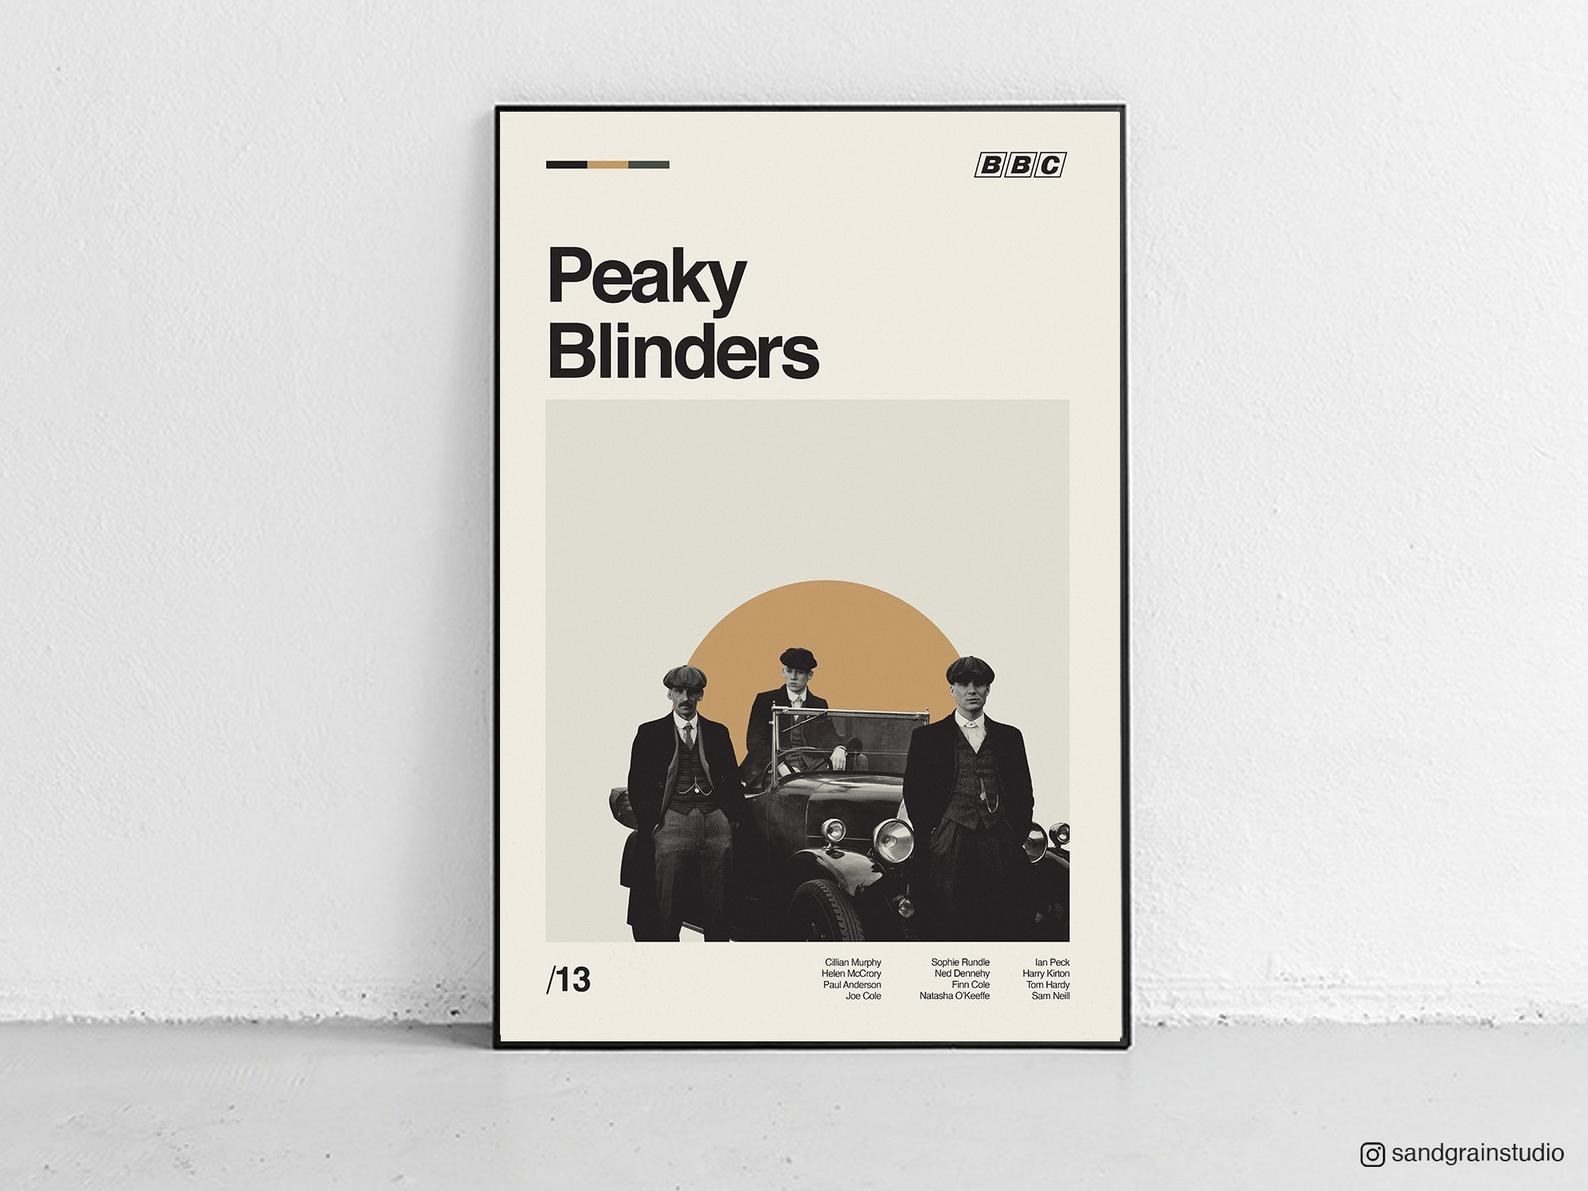 a retro-style Peaky Blinders poster